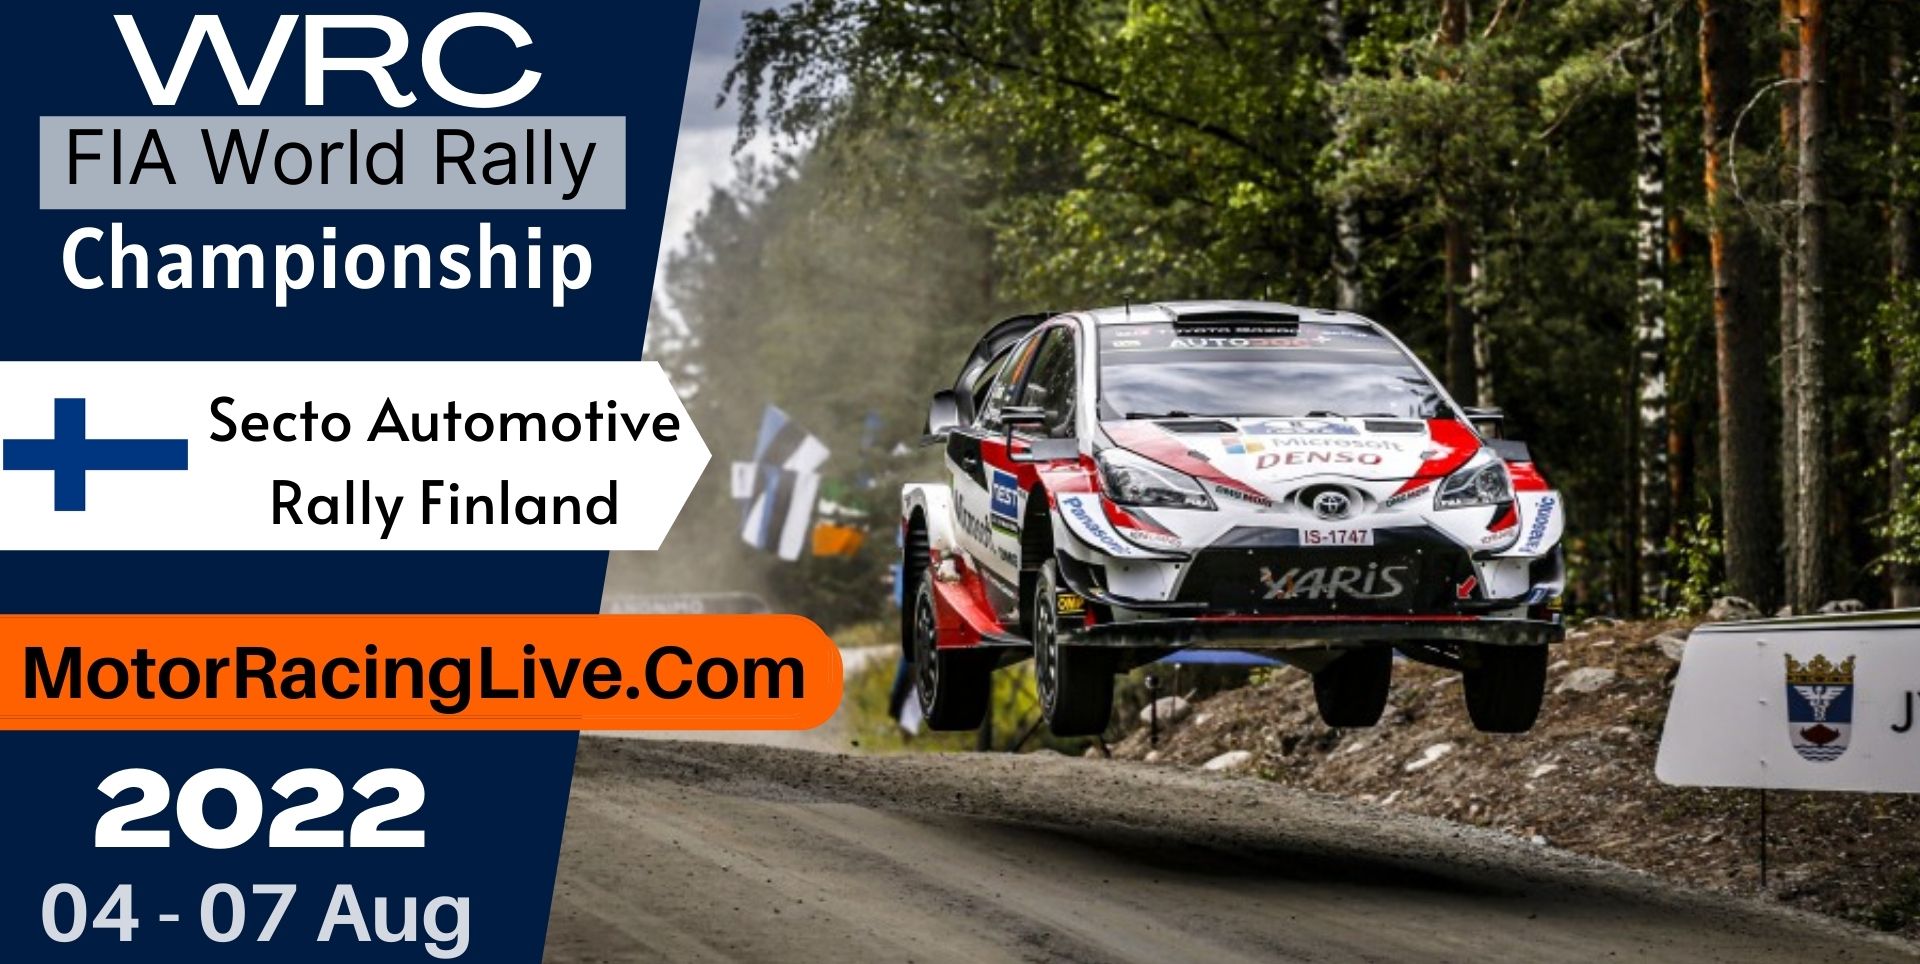 WRC Secto Automotive Rally Finland Rd 8 Live Stream 2022